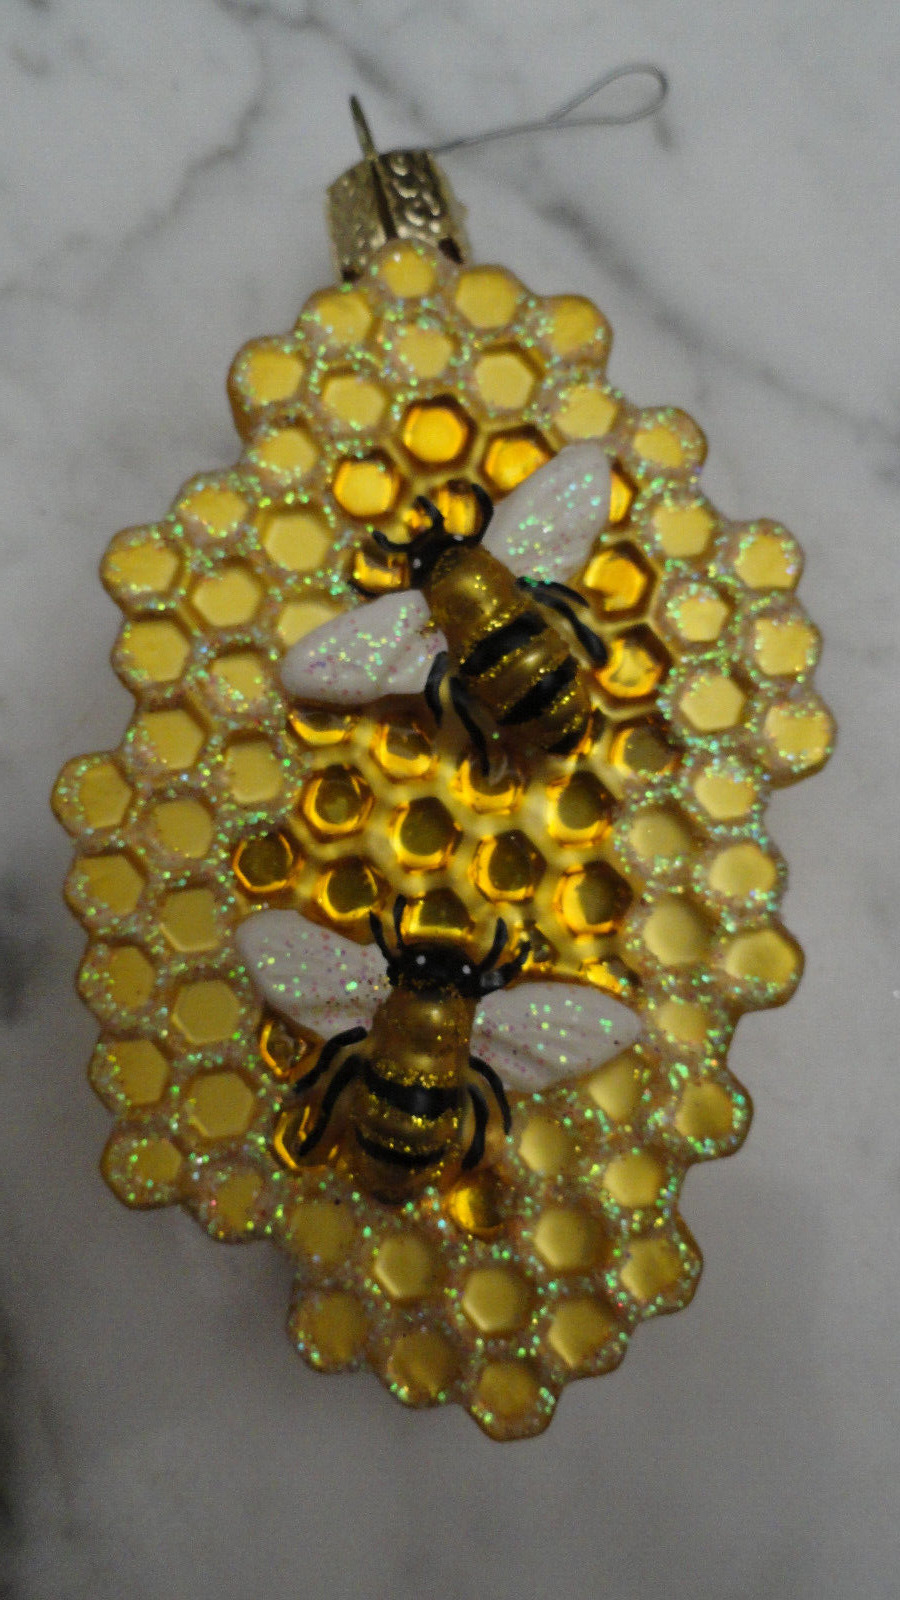 Old World Christmas OWC Ornament Honeycomb and Honeybees - No Box